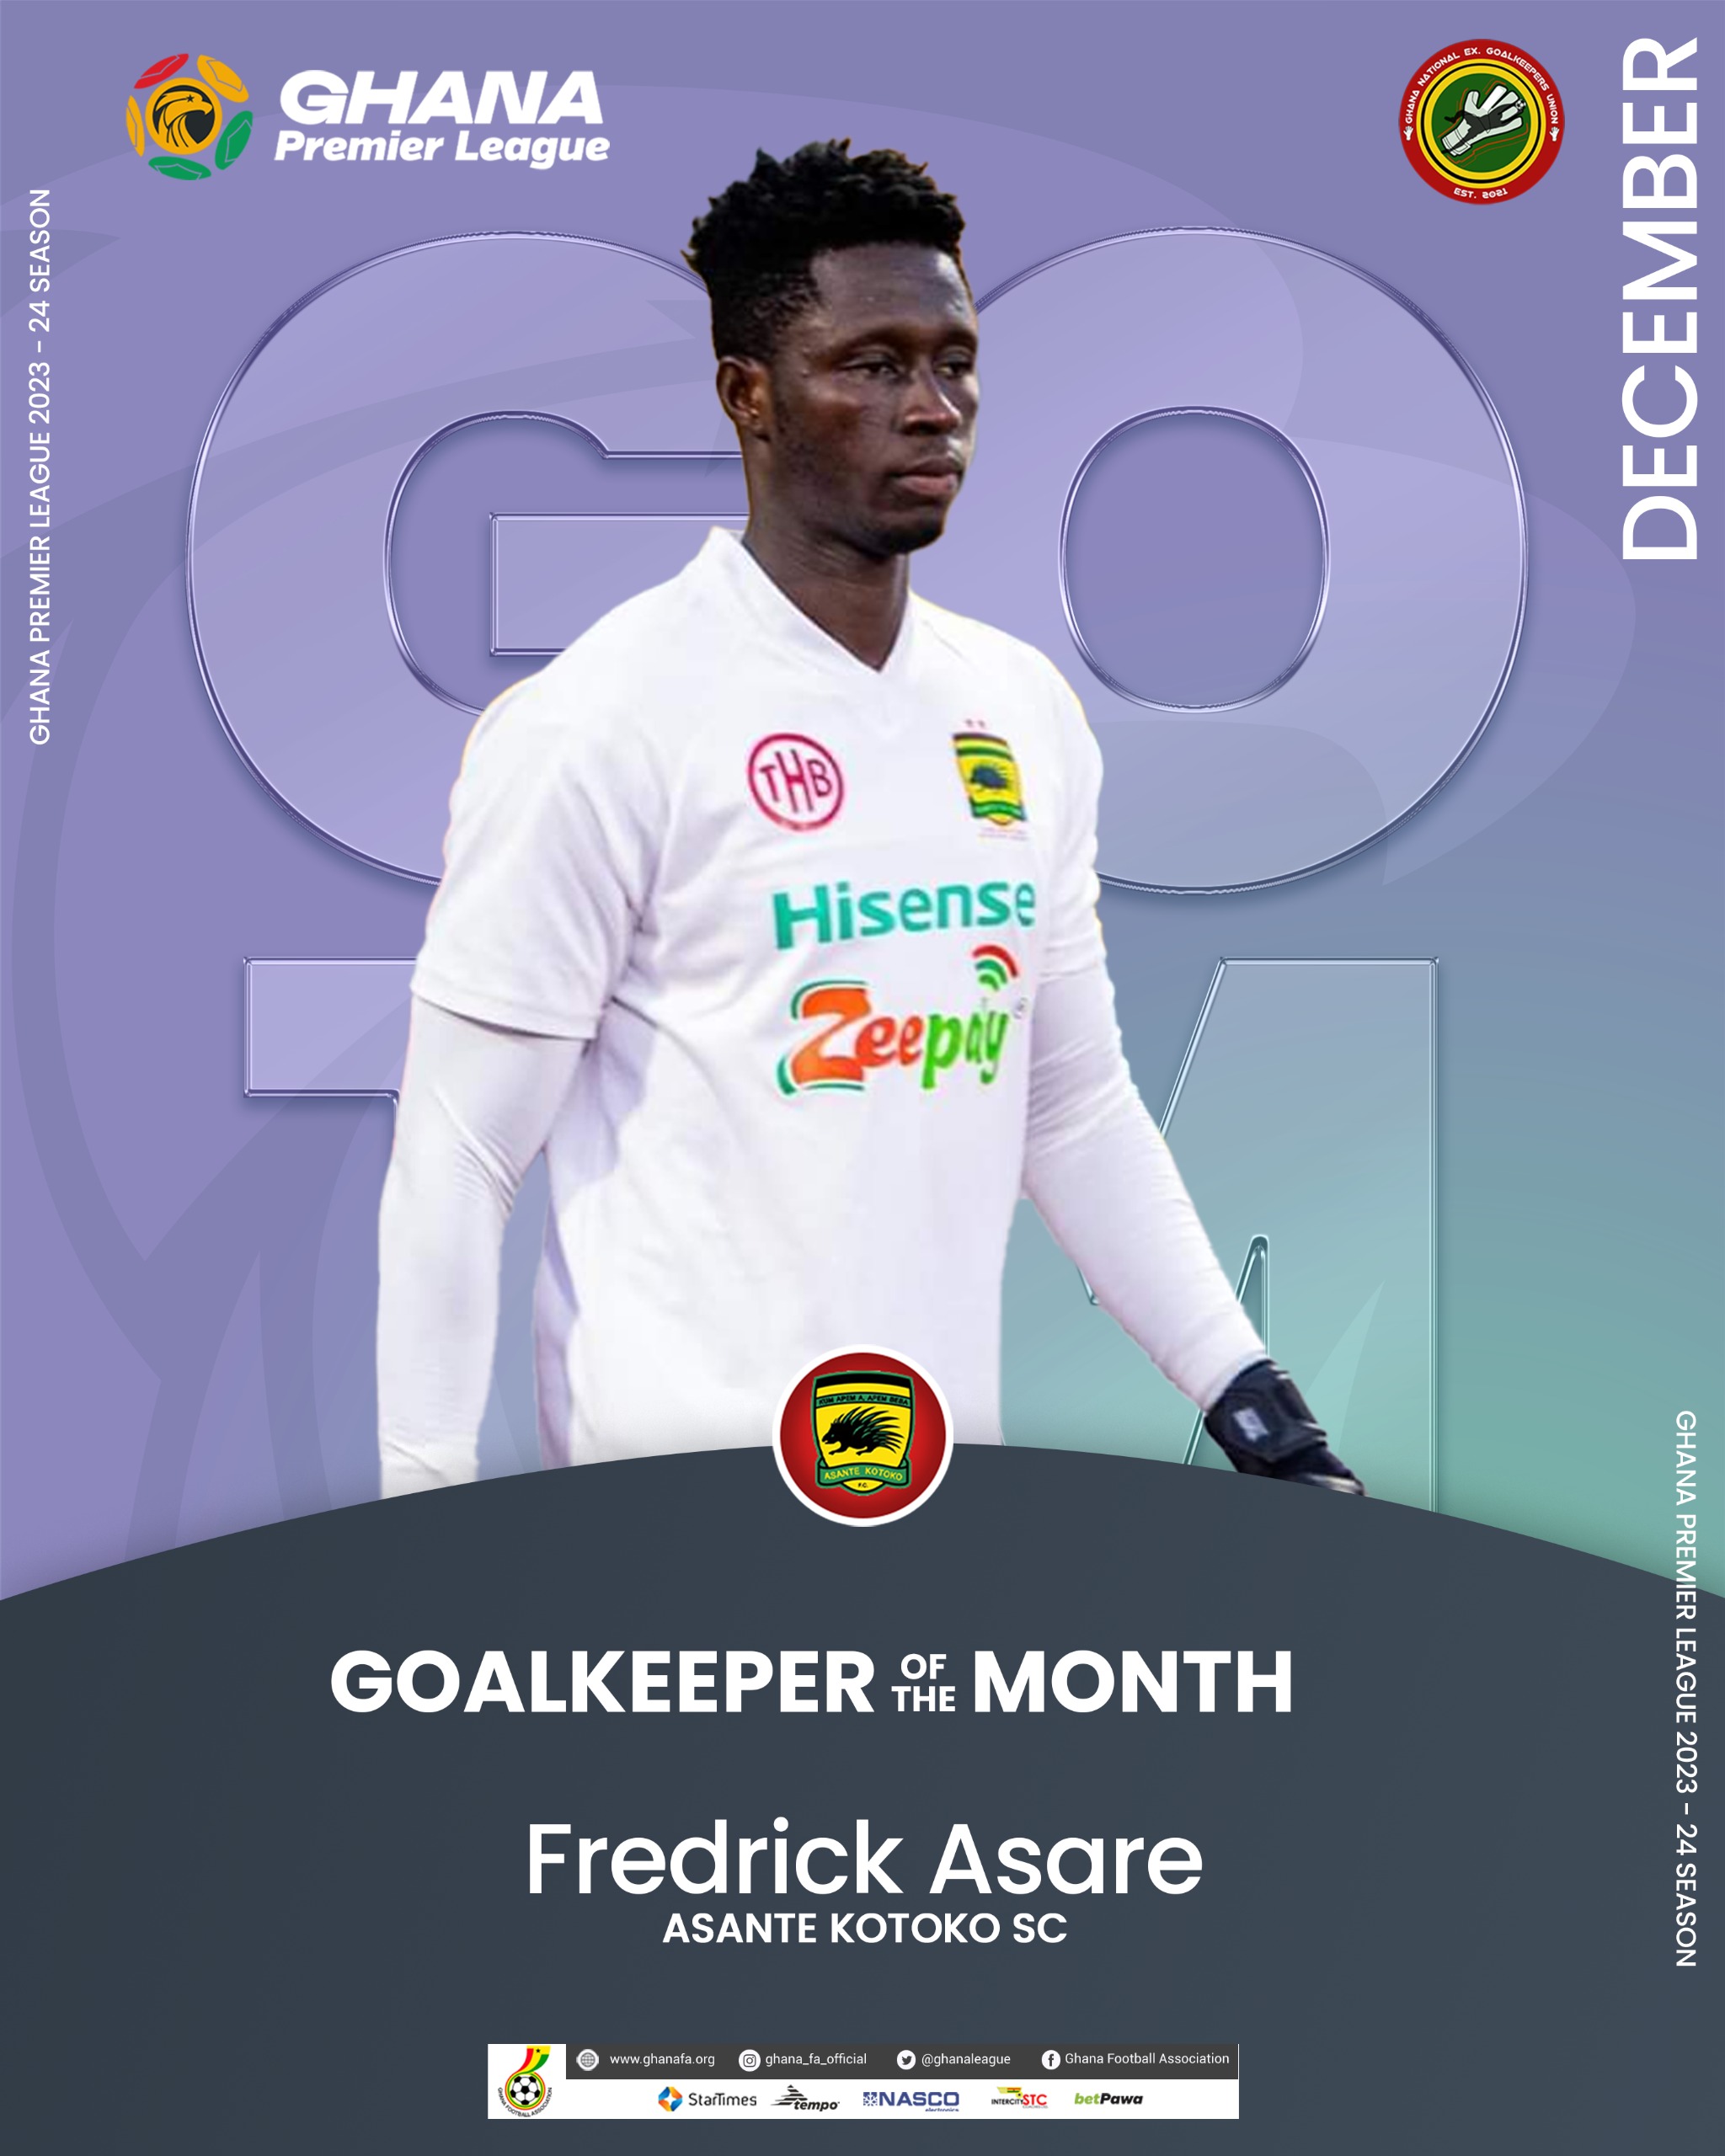 Frederick Asare wins Goalkeeper for the Month for December